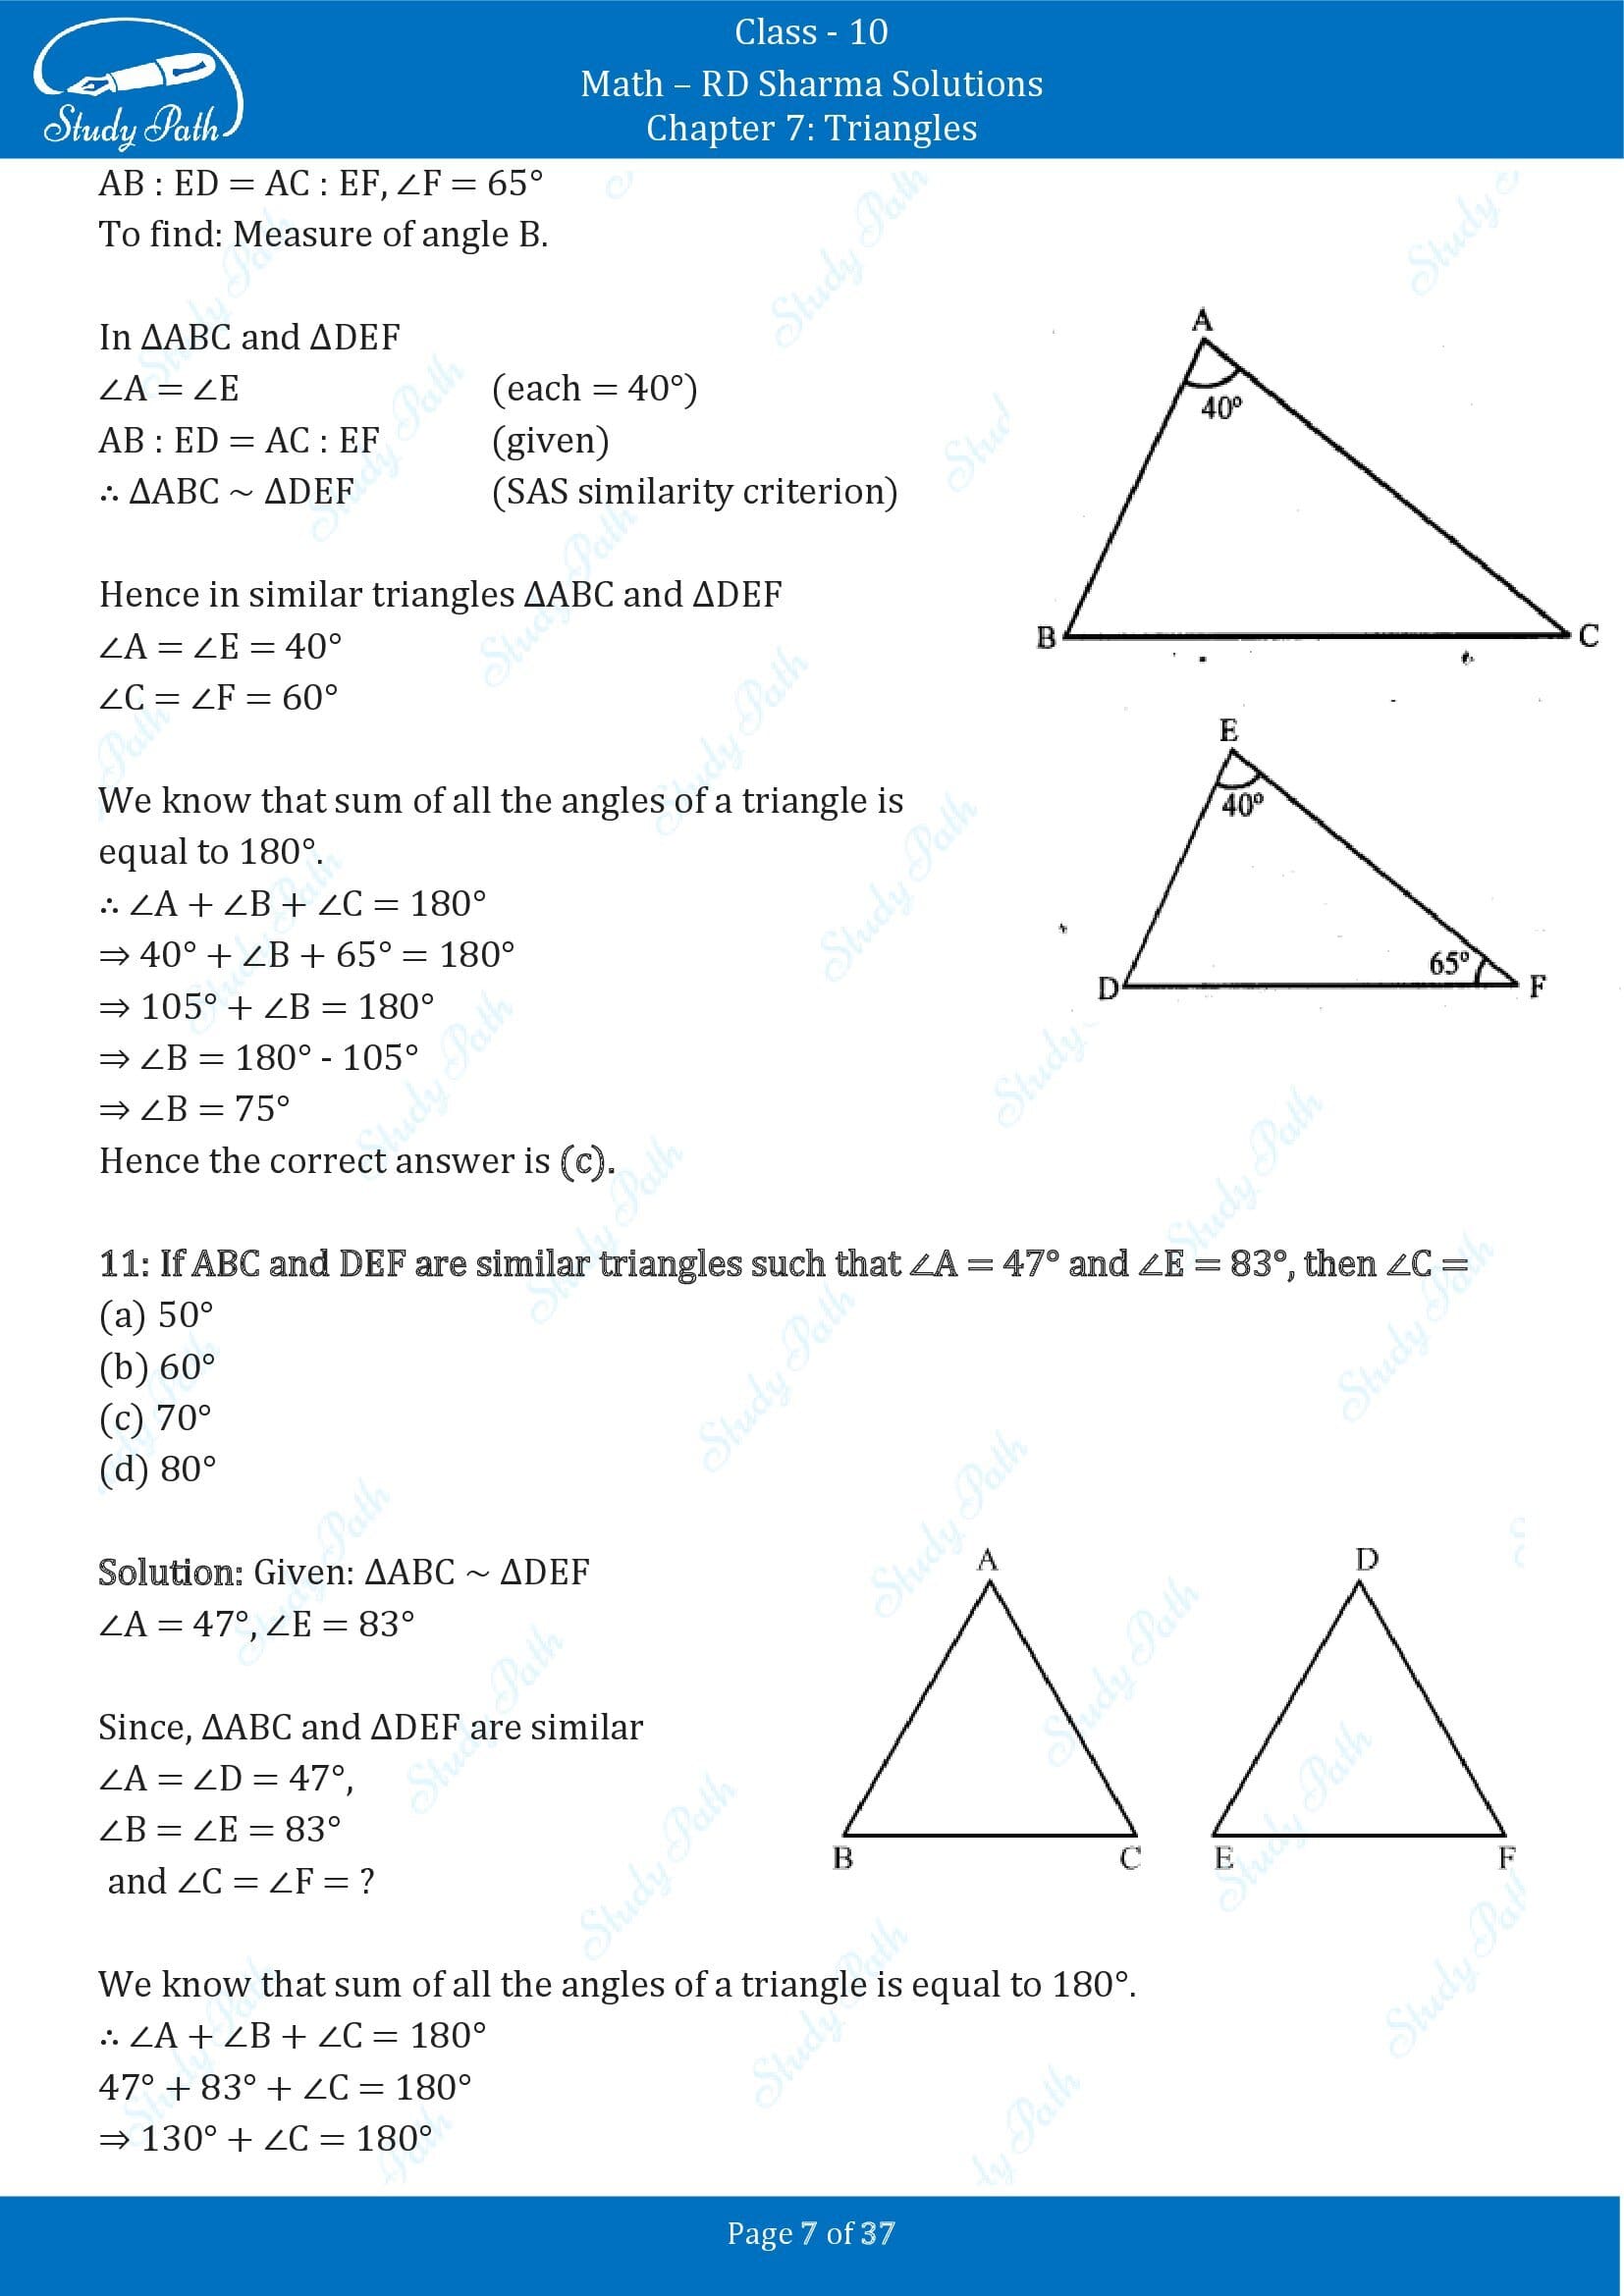 RD Sharma Solutions Class 10 Chapter 7 Triangles Multiple Choice Question MCQs 00007